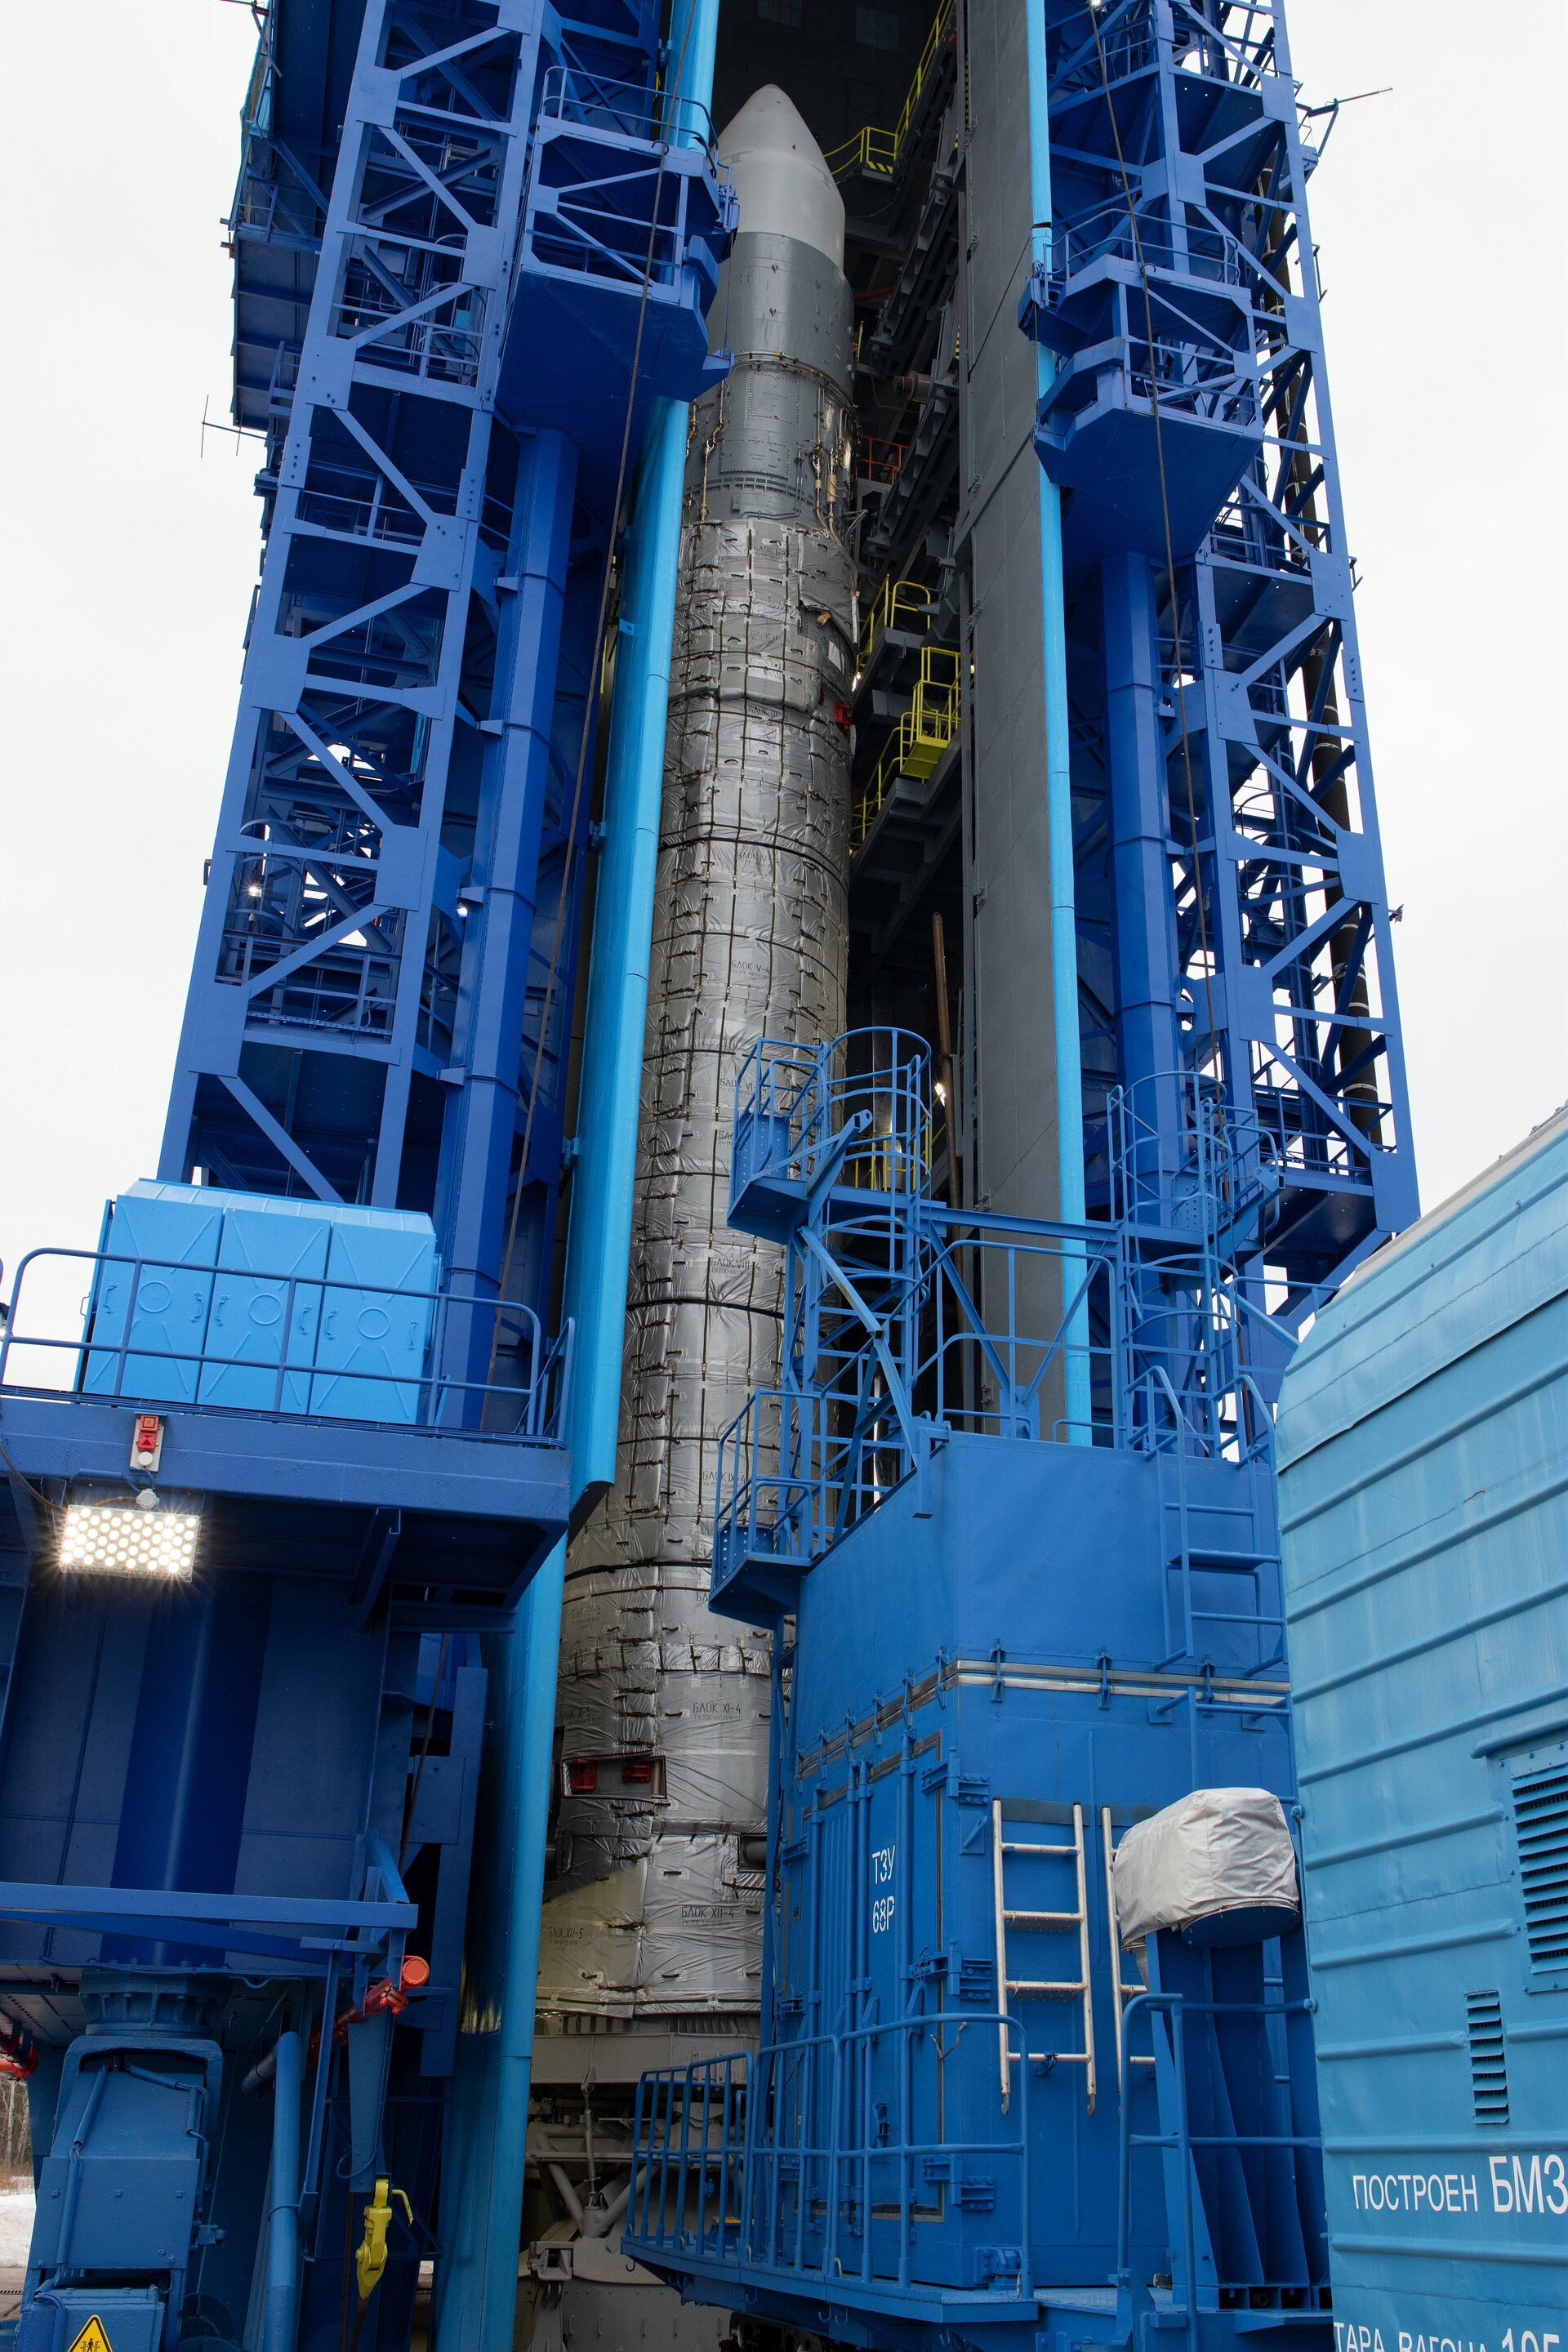 Sentinel-3B rocket in the launch tower